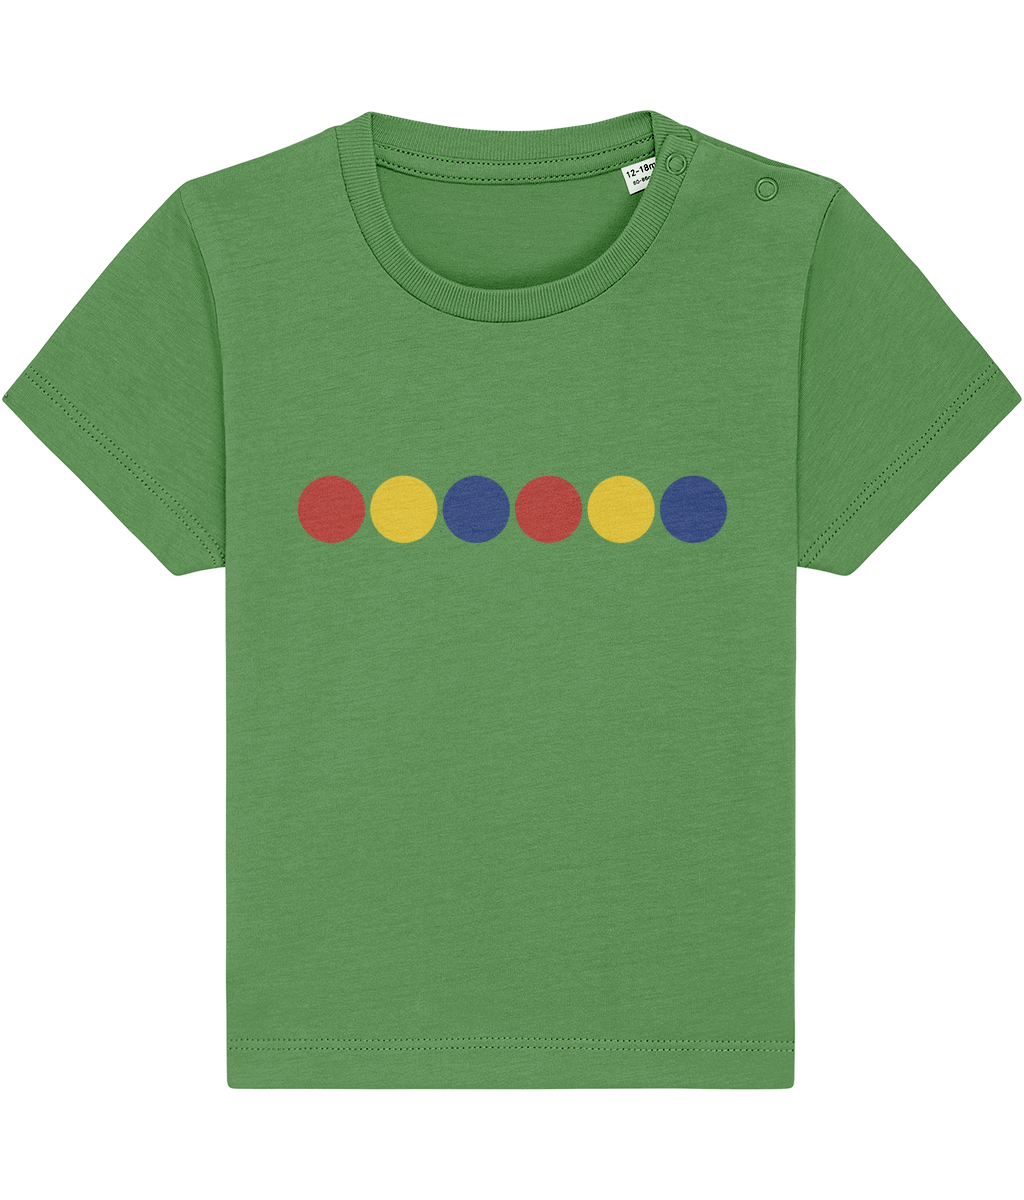 Red Yellow Blue Circles Baby Toddler Organic Cotton T Shirt - Buy any 3 get 10% off